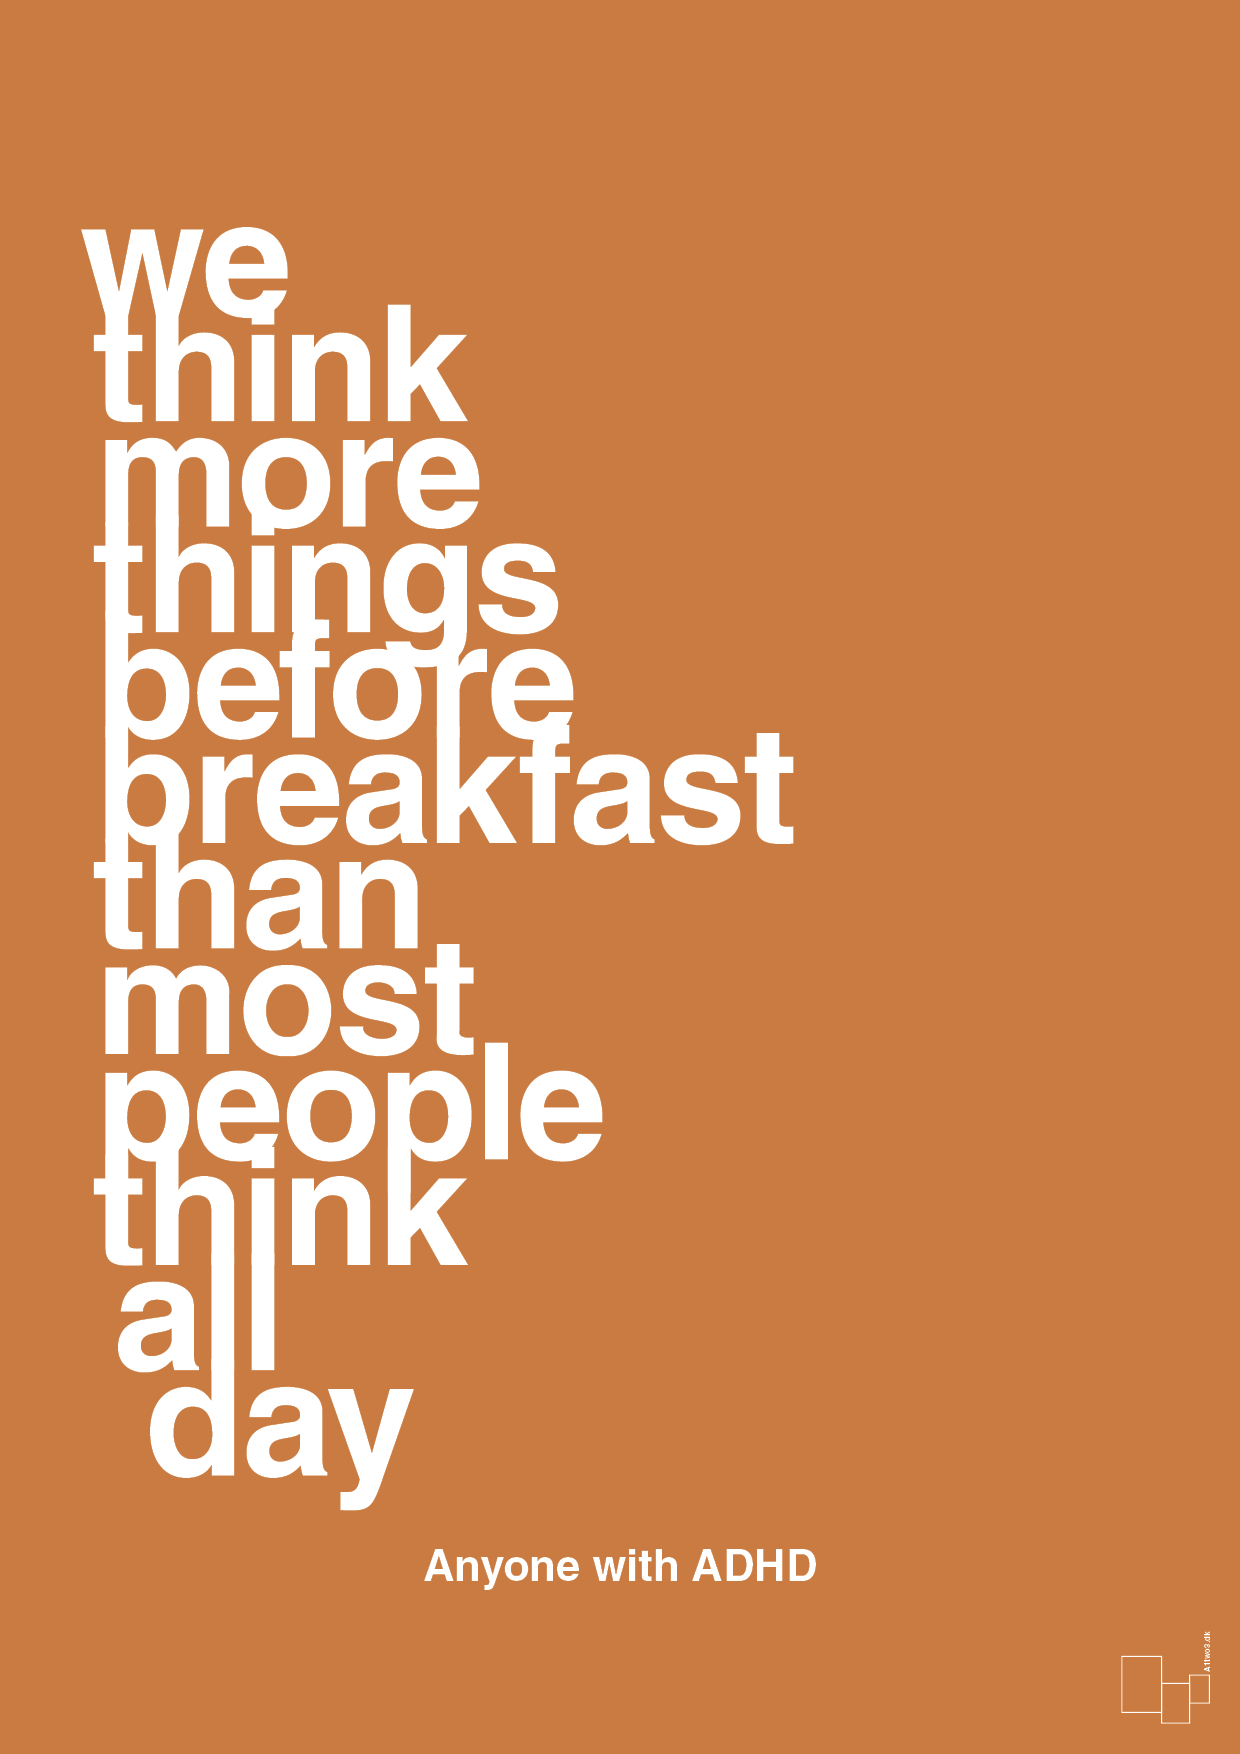 we think more things before breakfast than most people think all day - Plakat med Samfund i Rumba Orange